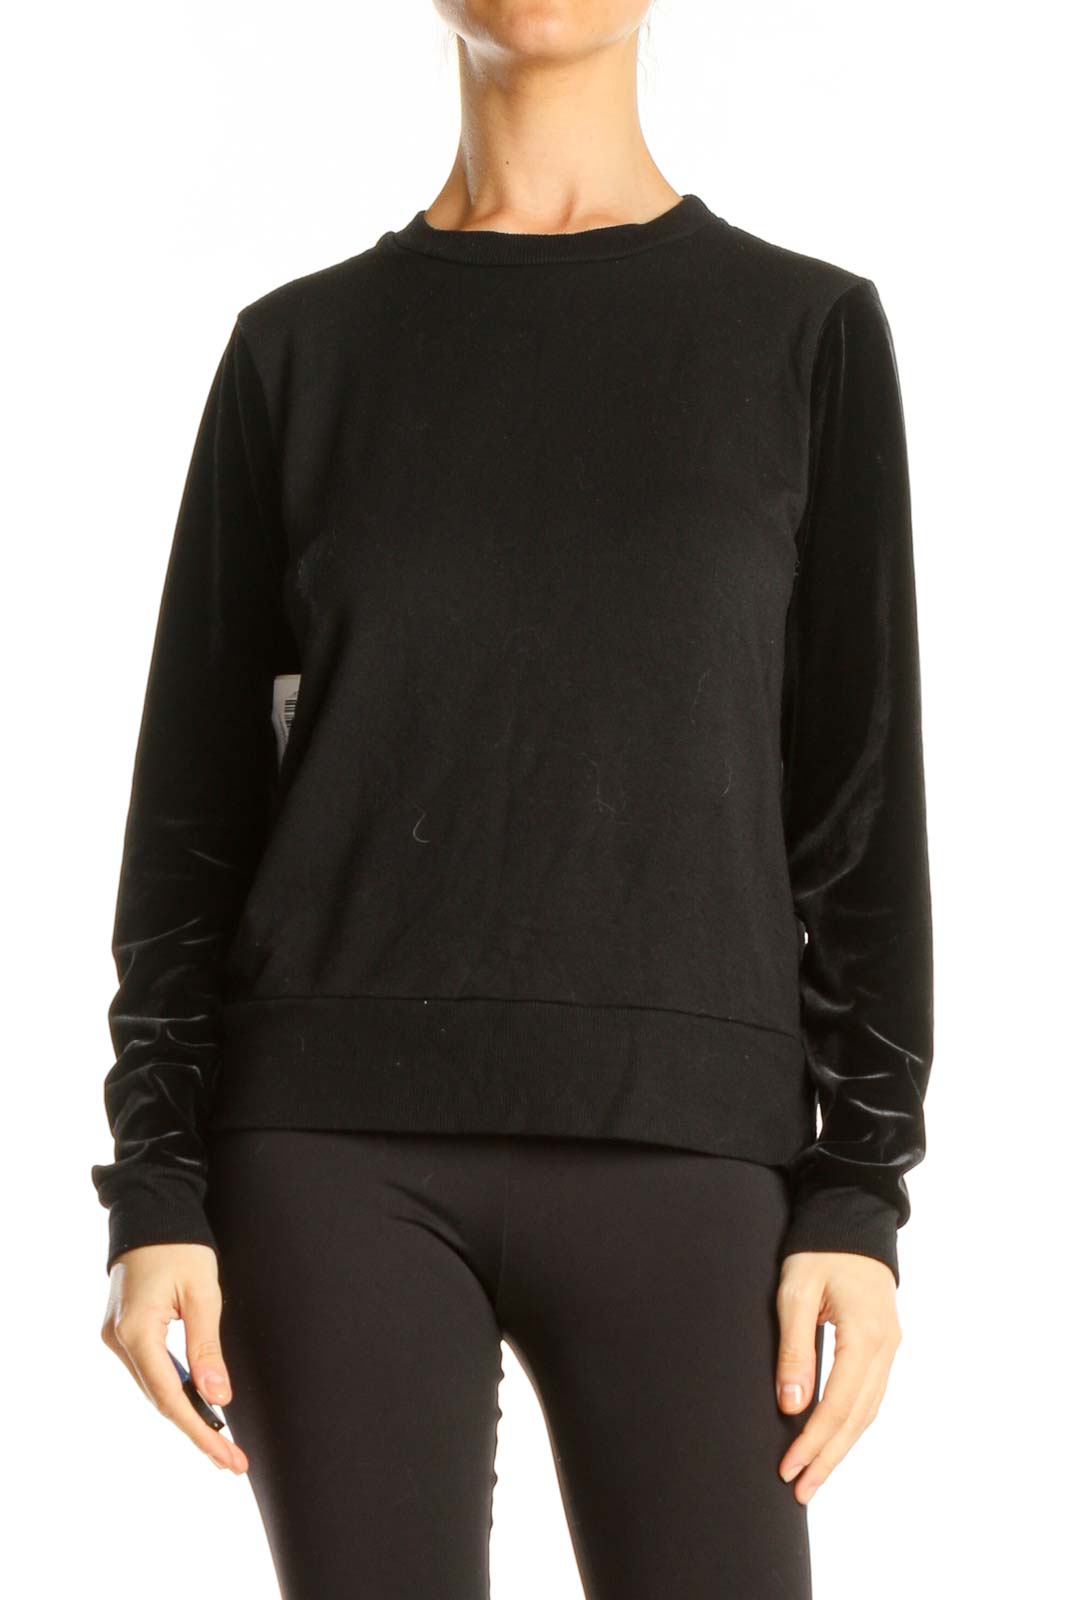 Black Casual Long Sleeve Top Front